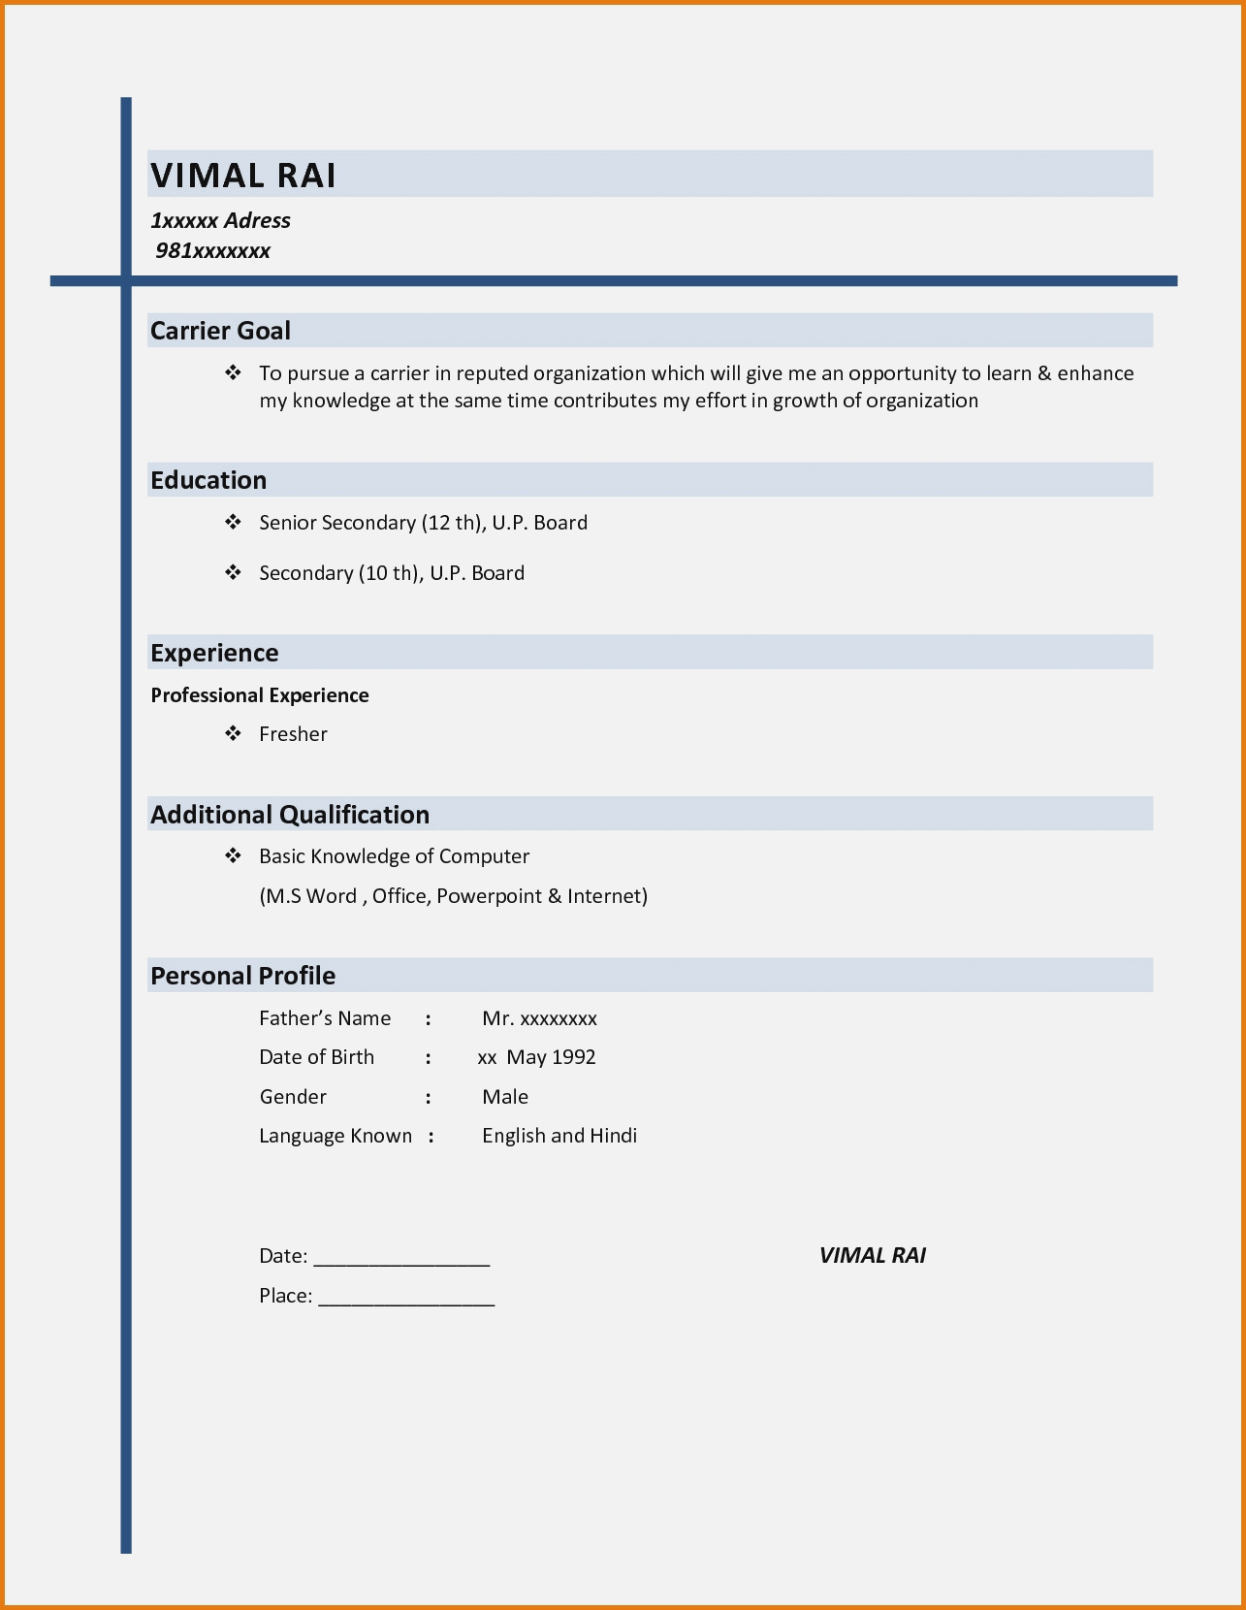 Five Things About | Realty Executives Mi : Invoice And Resume - Free Printable Resume Builder